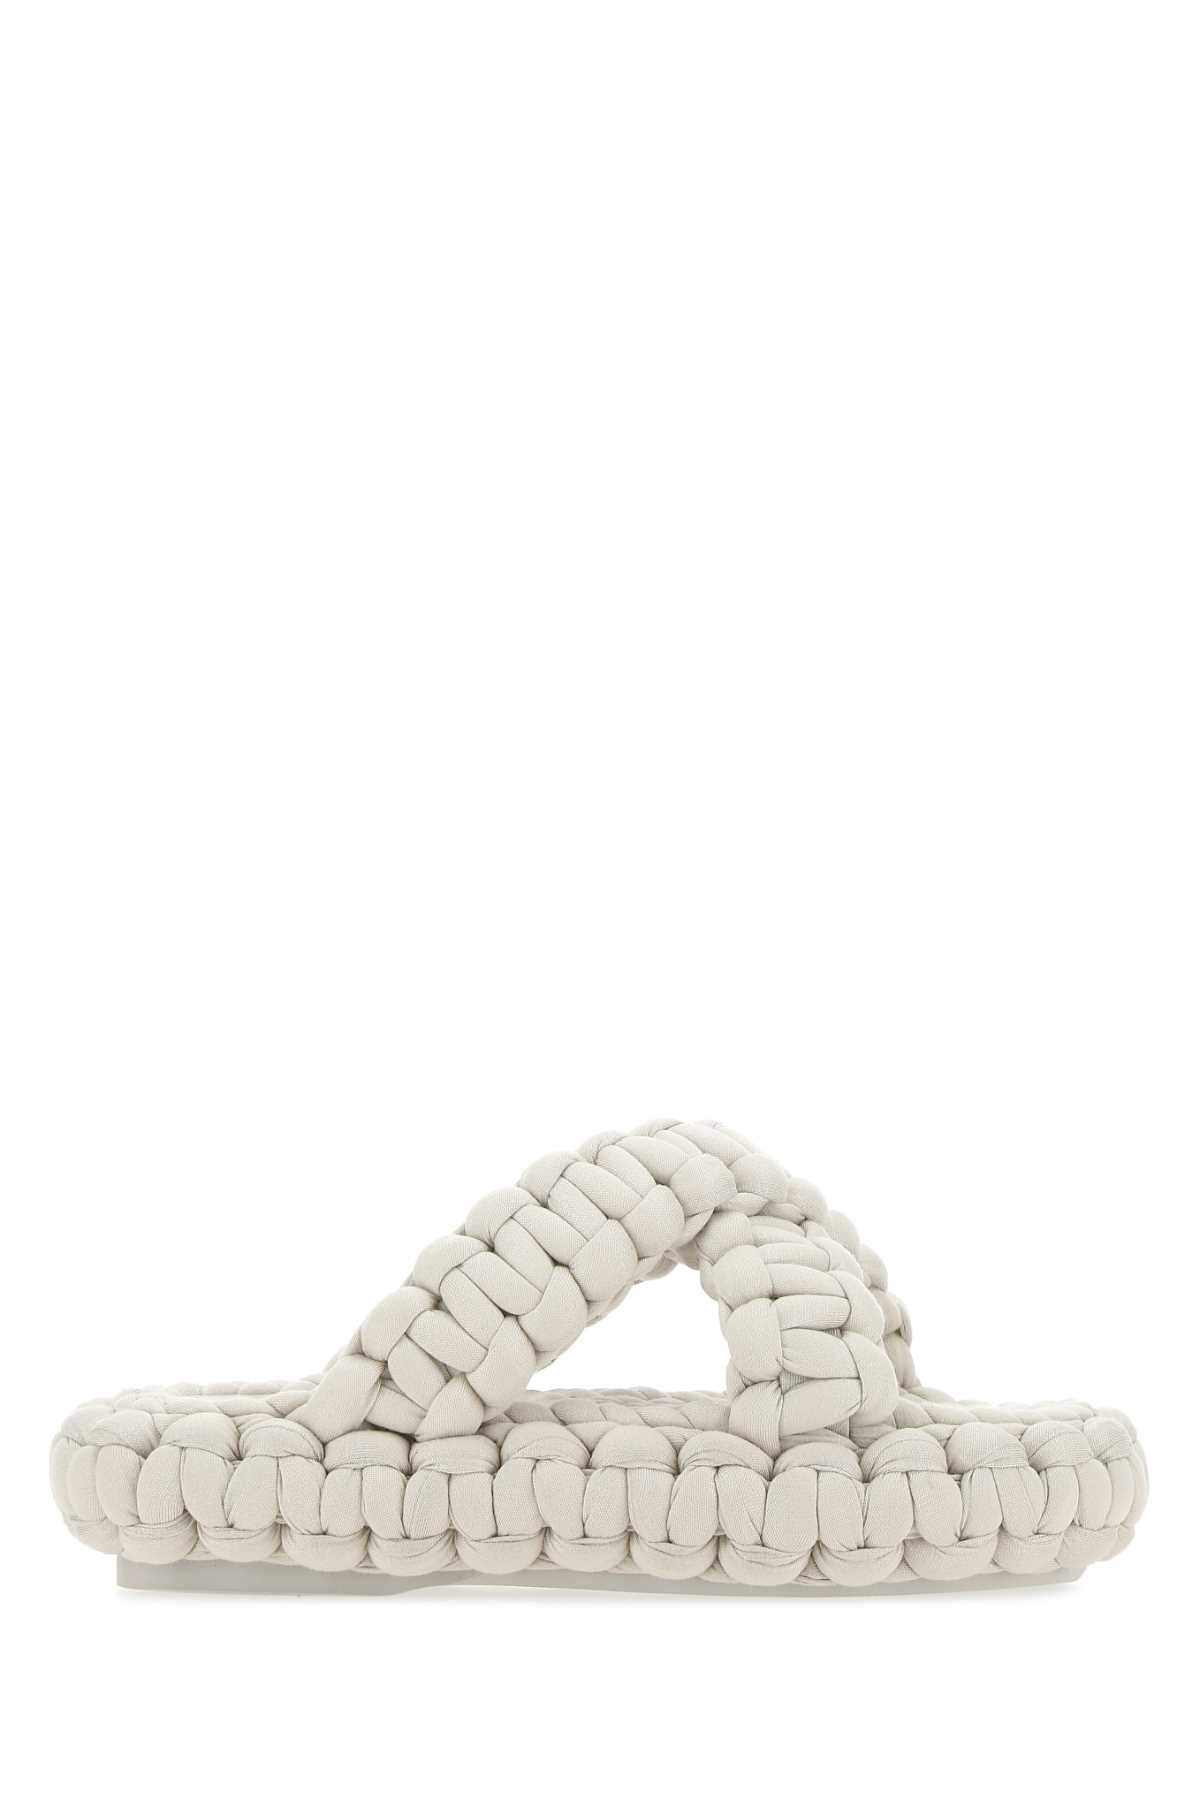 Chloé Ivory Stretch Fabric Kamy Slippers In 122